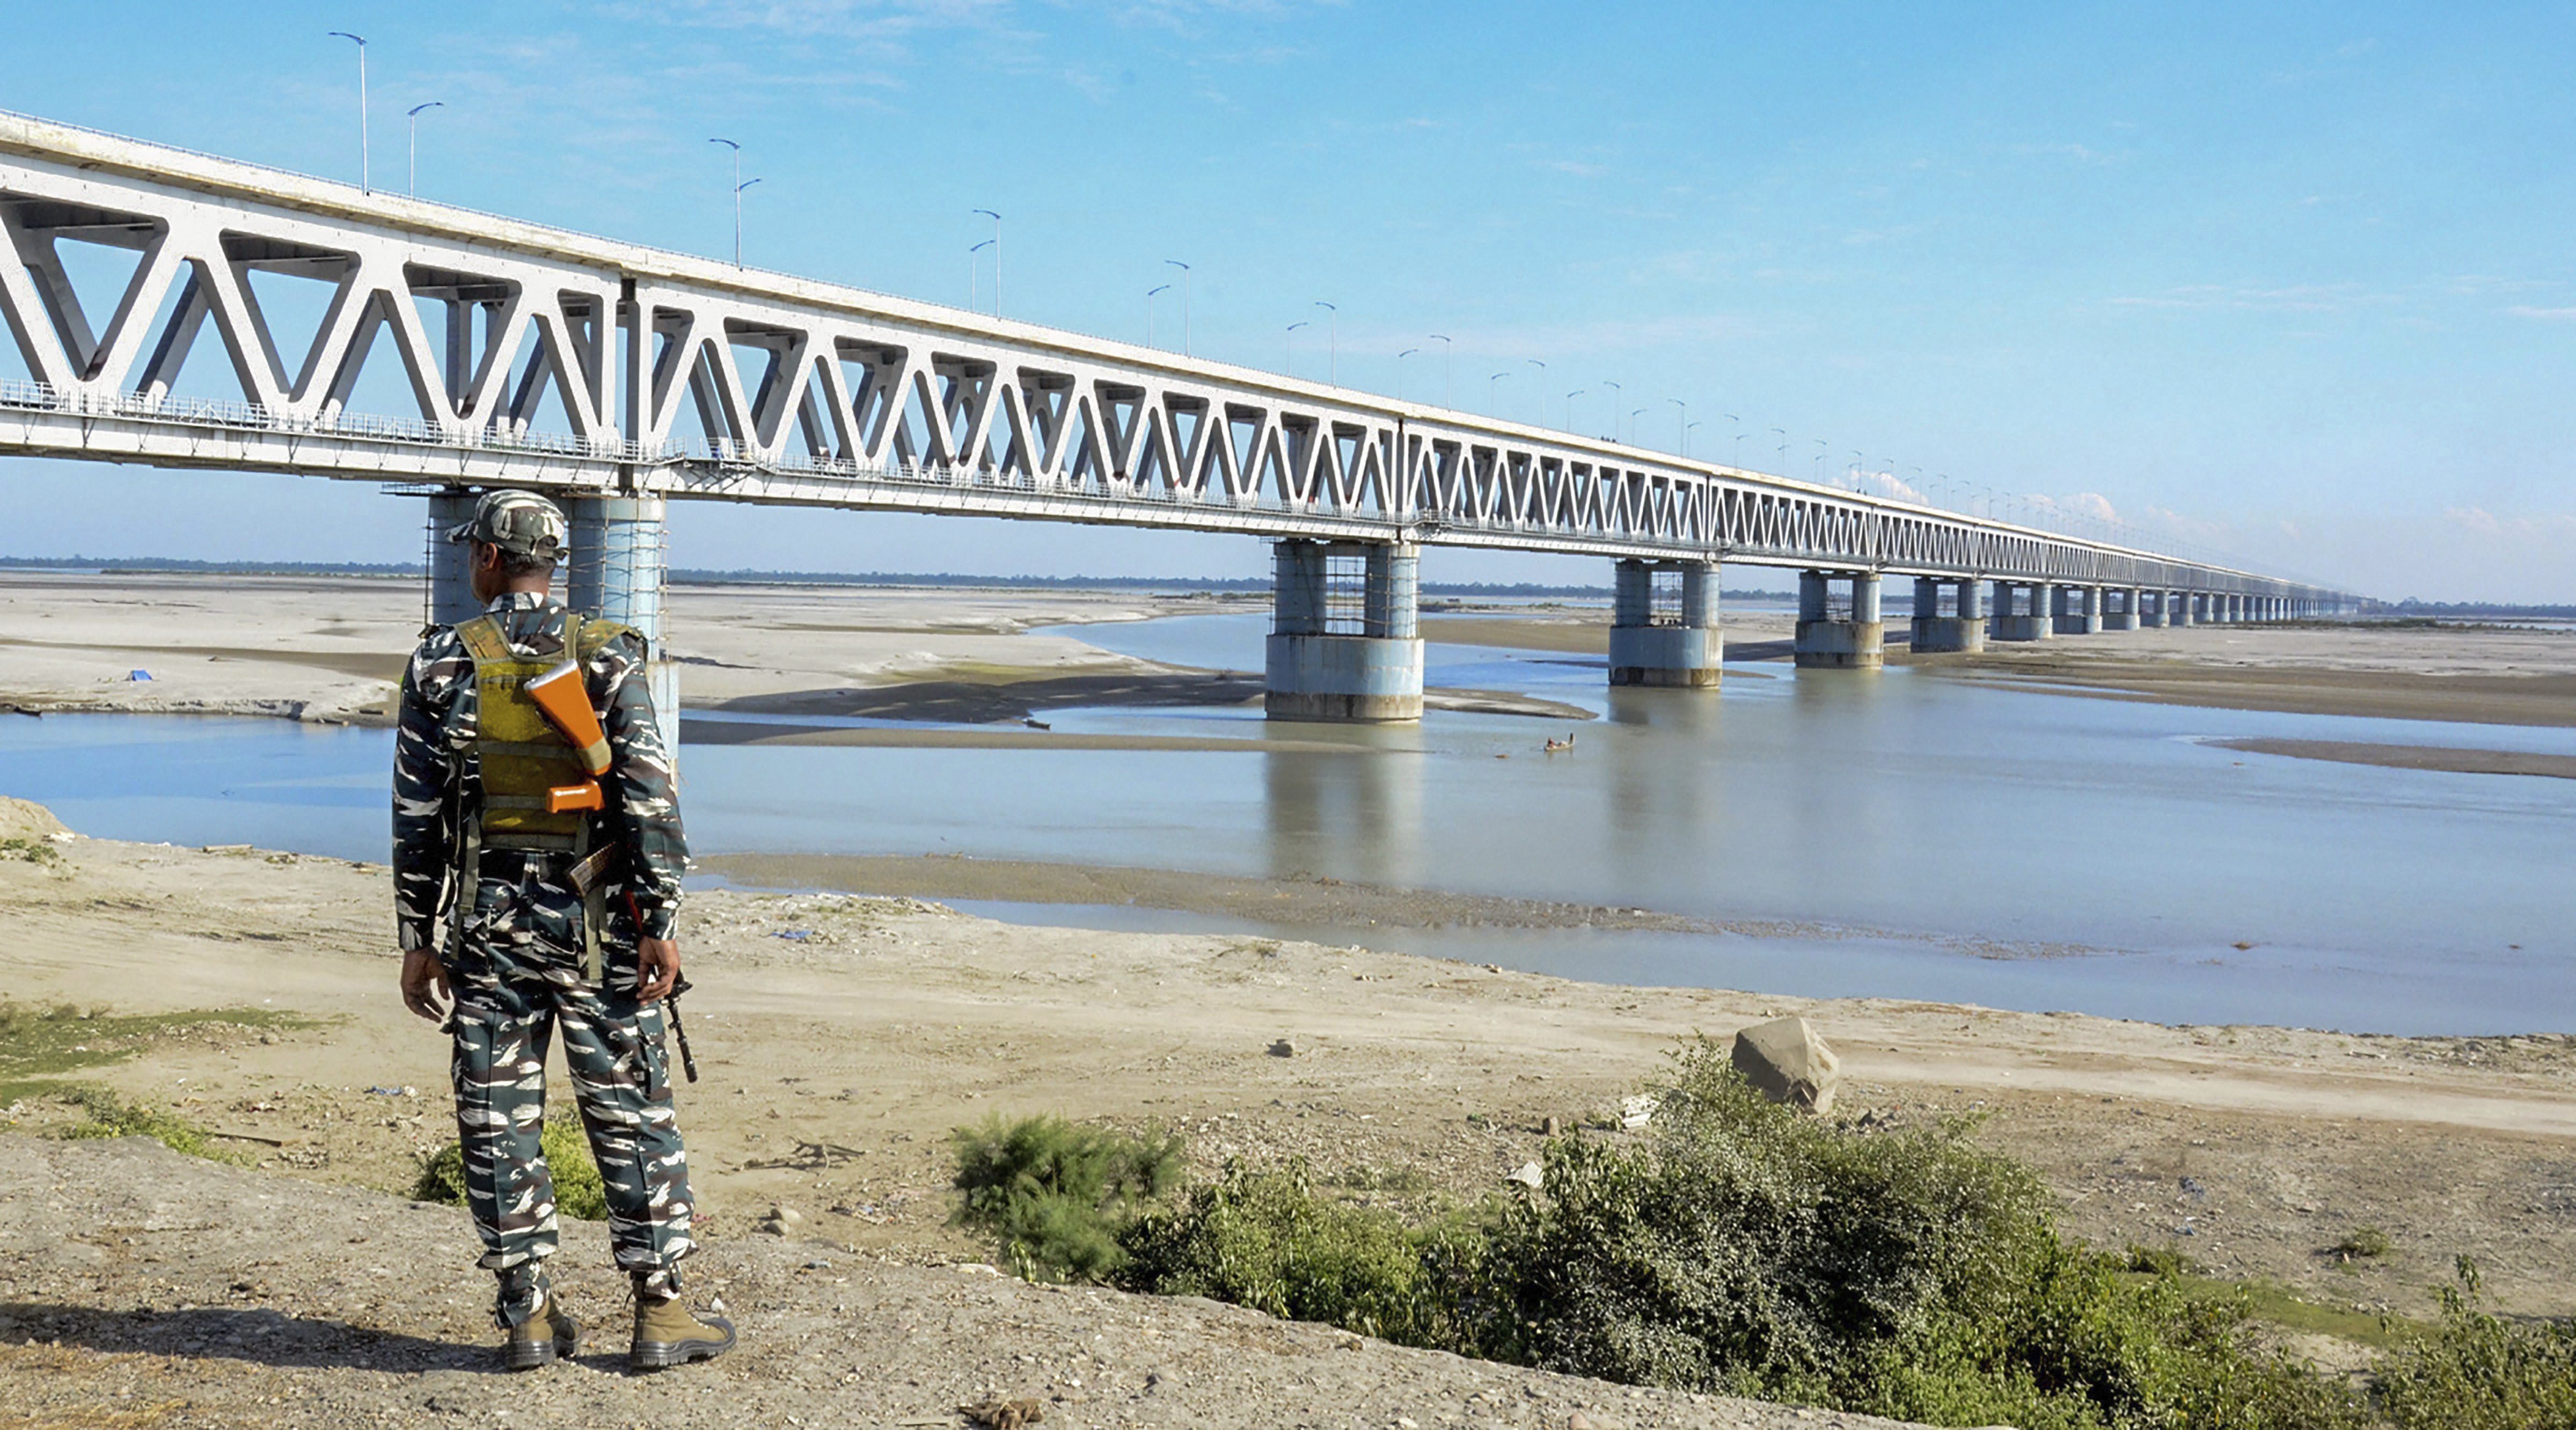 A security personnel awaits the arrival of Assam Chief Minister Sarbananda Sonowal for the inspection of Bogibell Bridge, ahead of its inauguration, in Dibrugarh - PTI